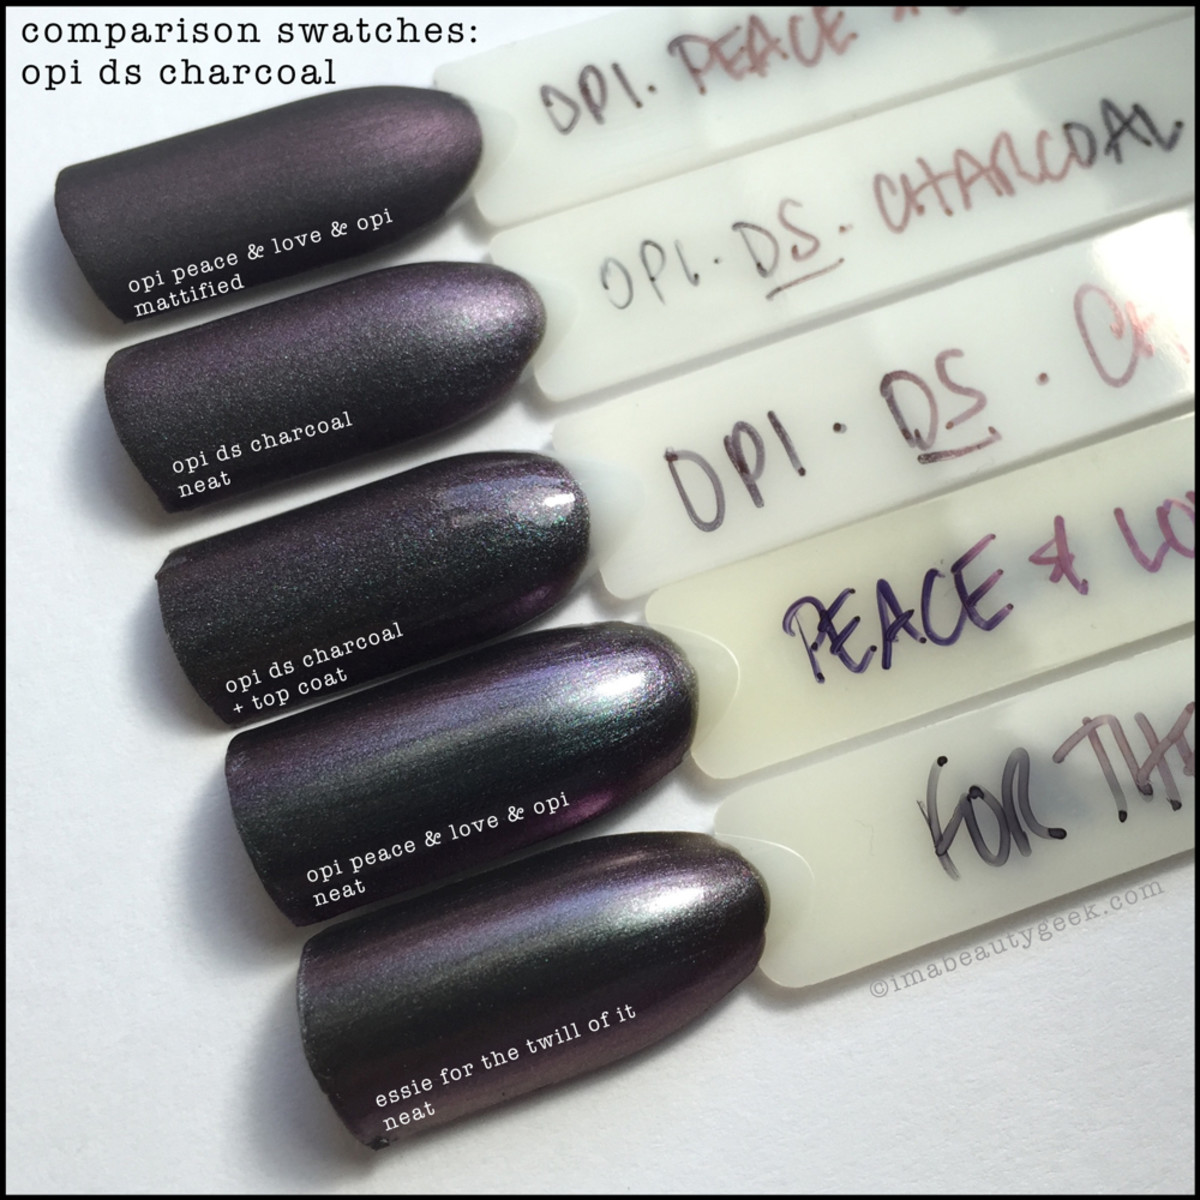 OPI DS Charcoal Comparison Essie For the Twill of It_3